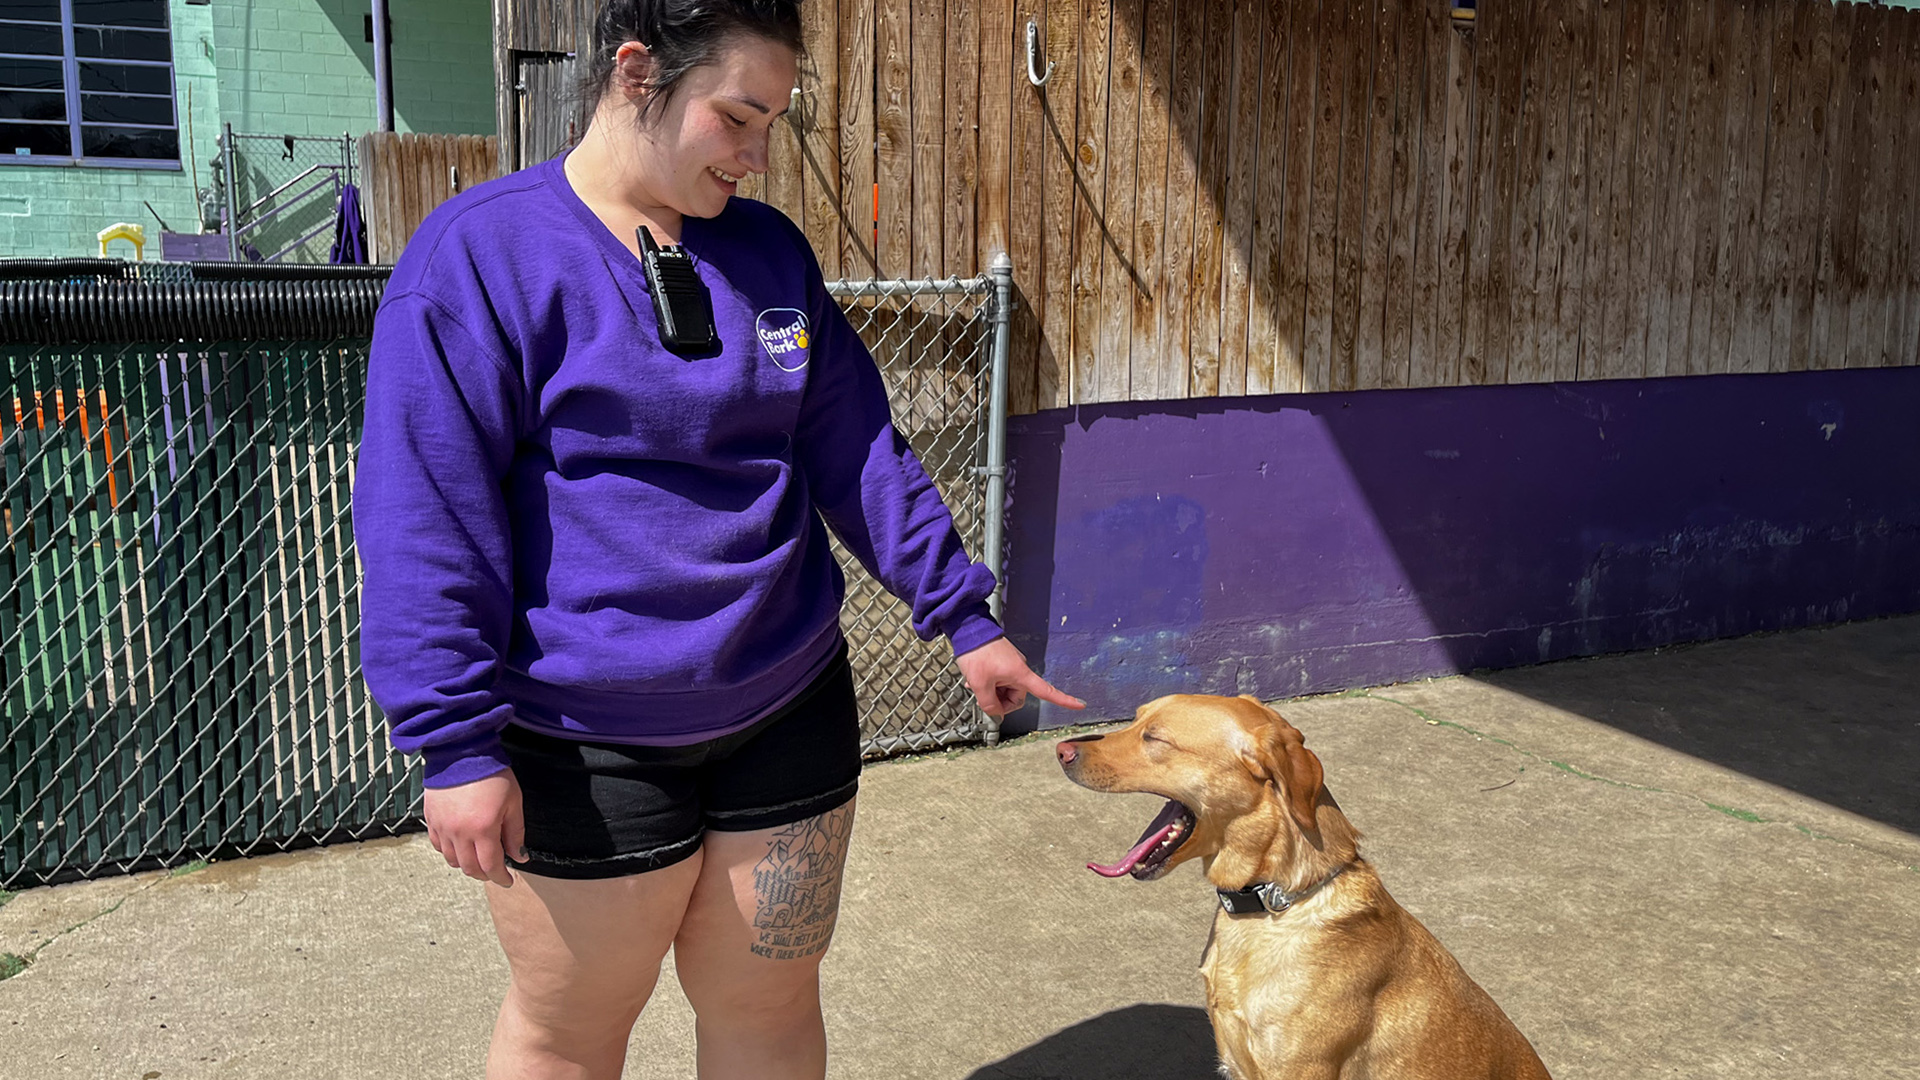 Alayna Kohloff stands and points her left index finger toward the snout of a sitting dog on an outdoor concrete patio, with a chain-link fence and wood wall in the background.